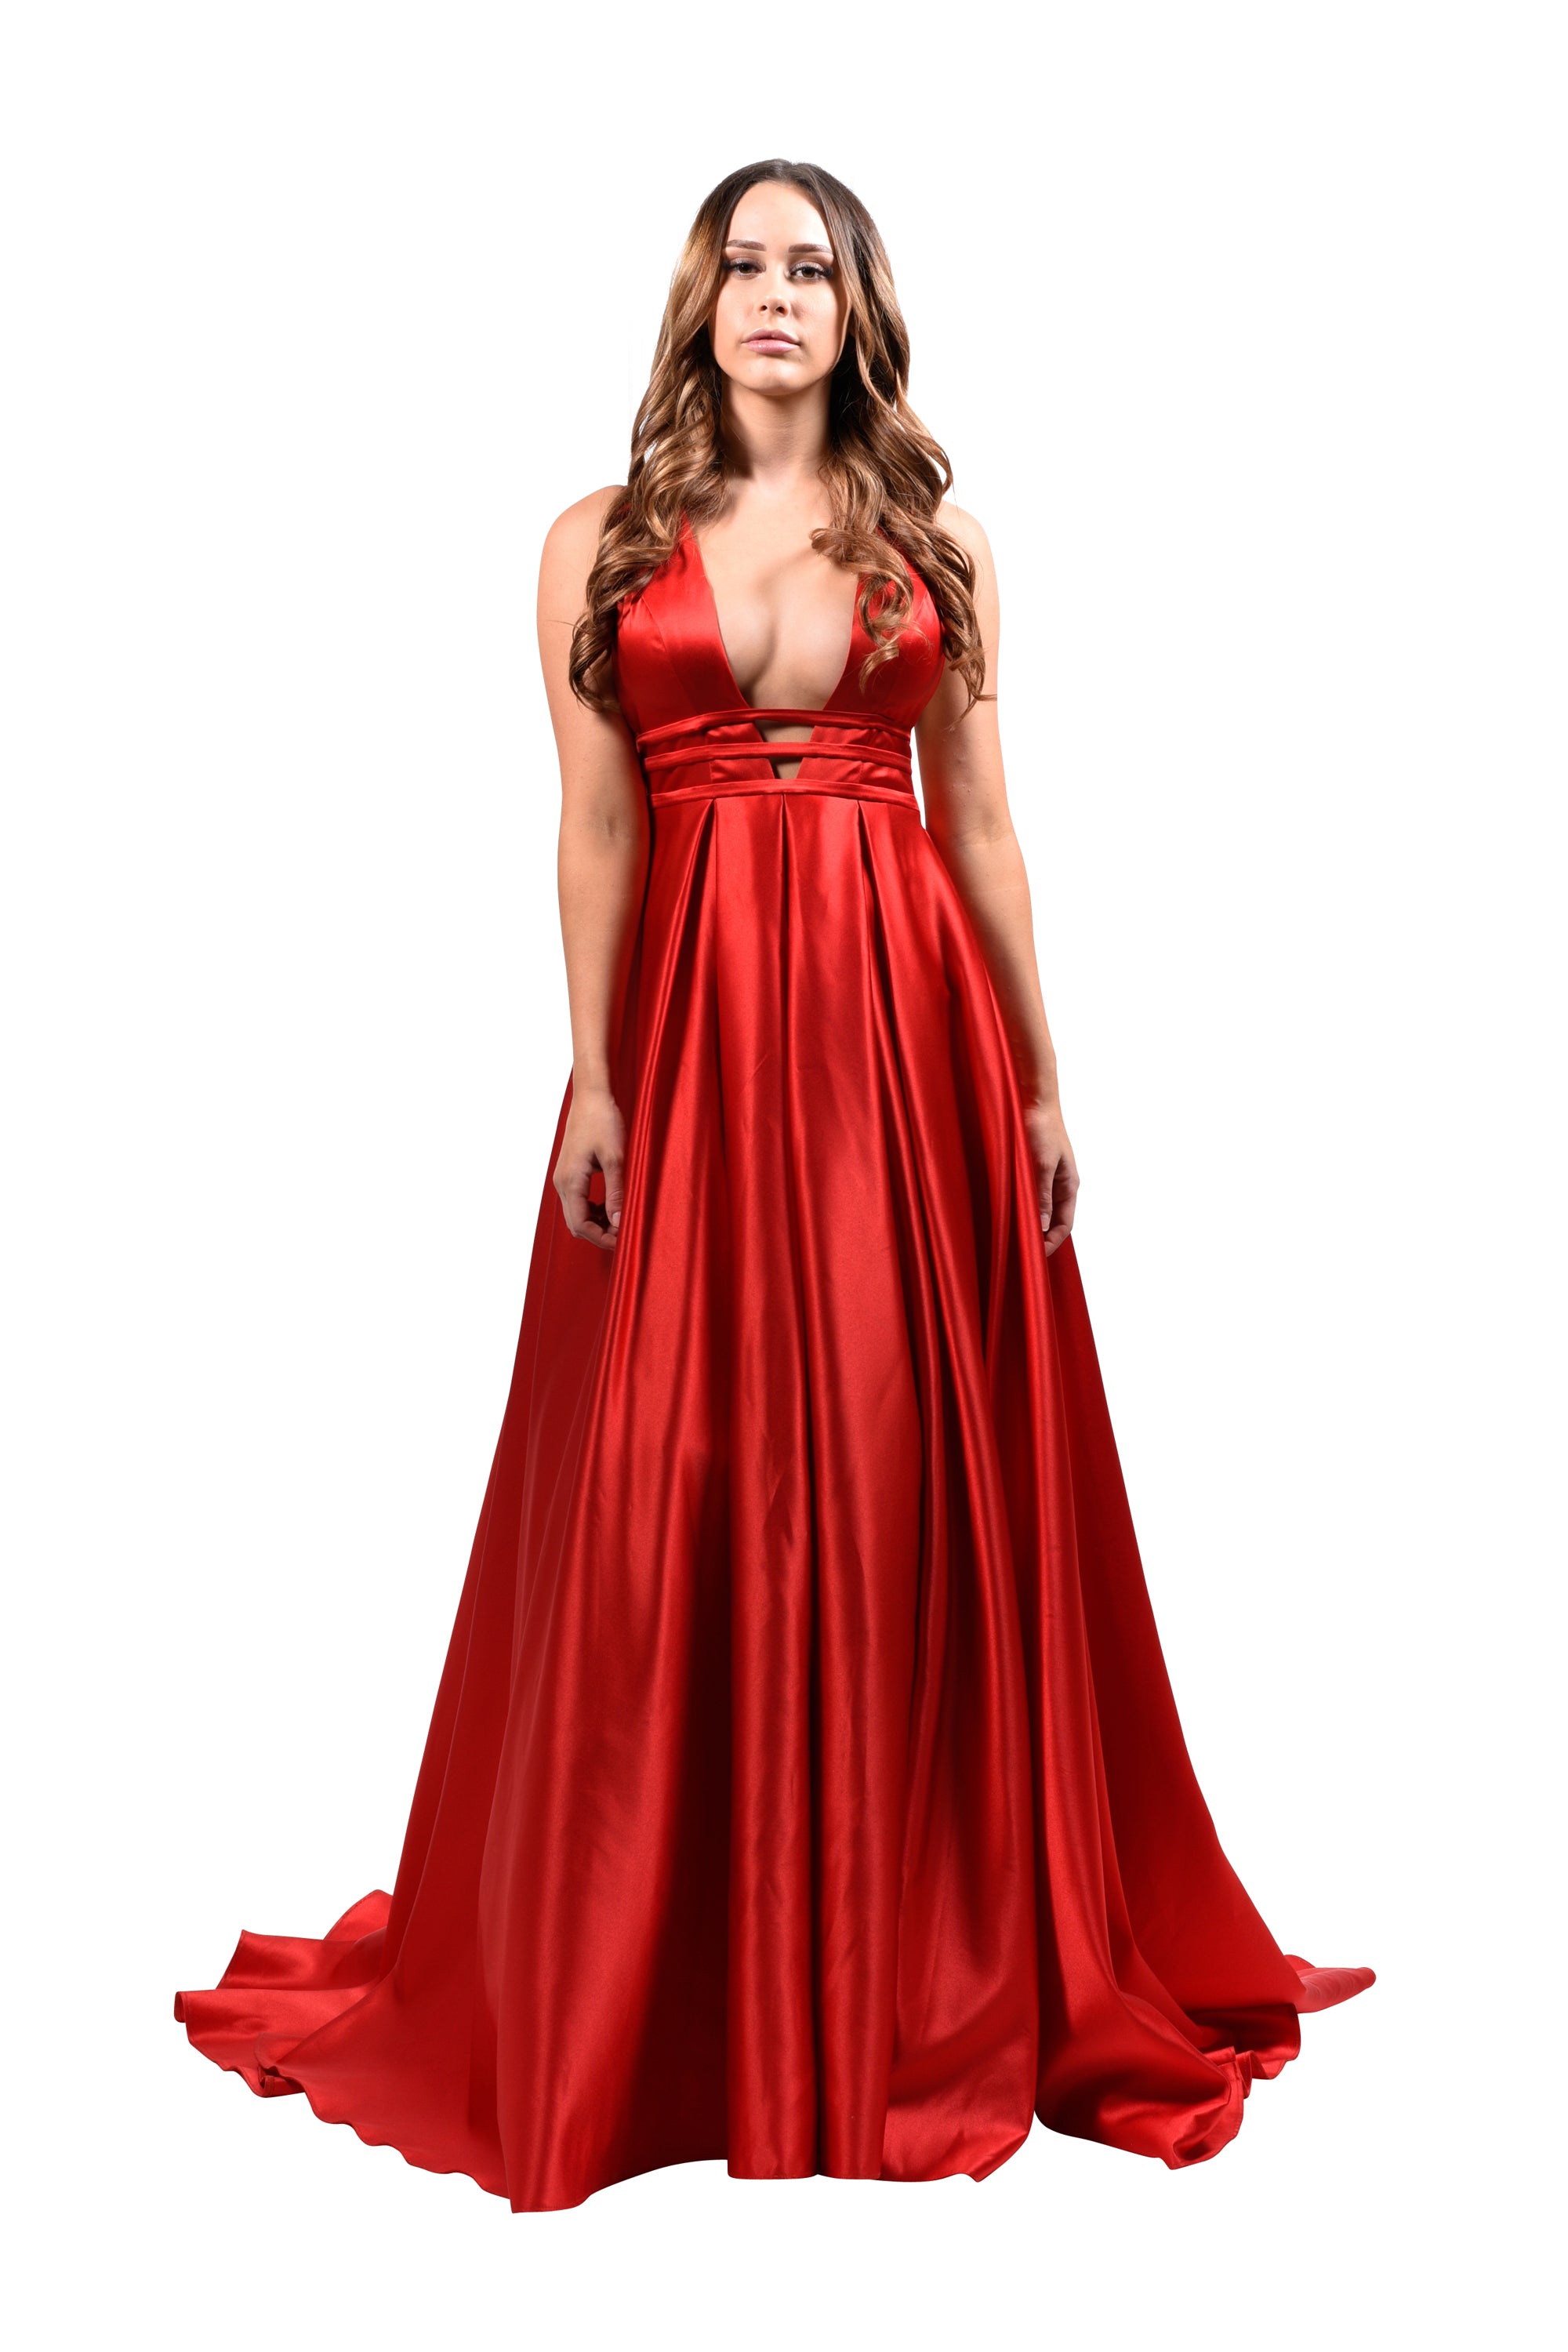 Honey Couture PIPPA Red V Front Formal Ball Gown Private Label$ AfterPay Humm ZipPay LayBuy Sezzle